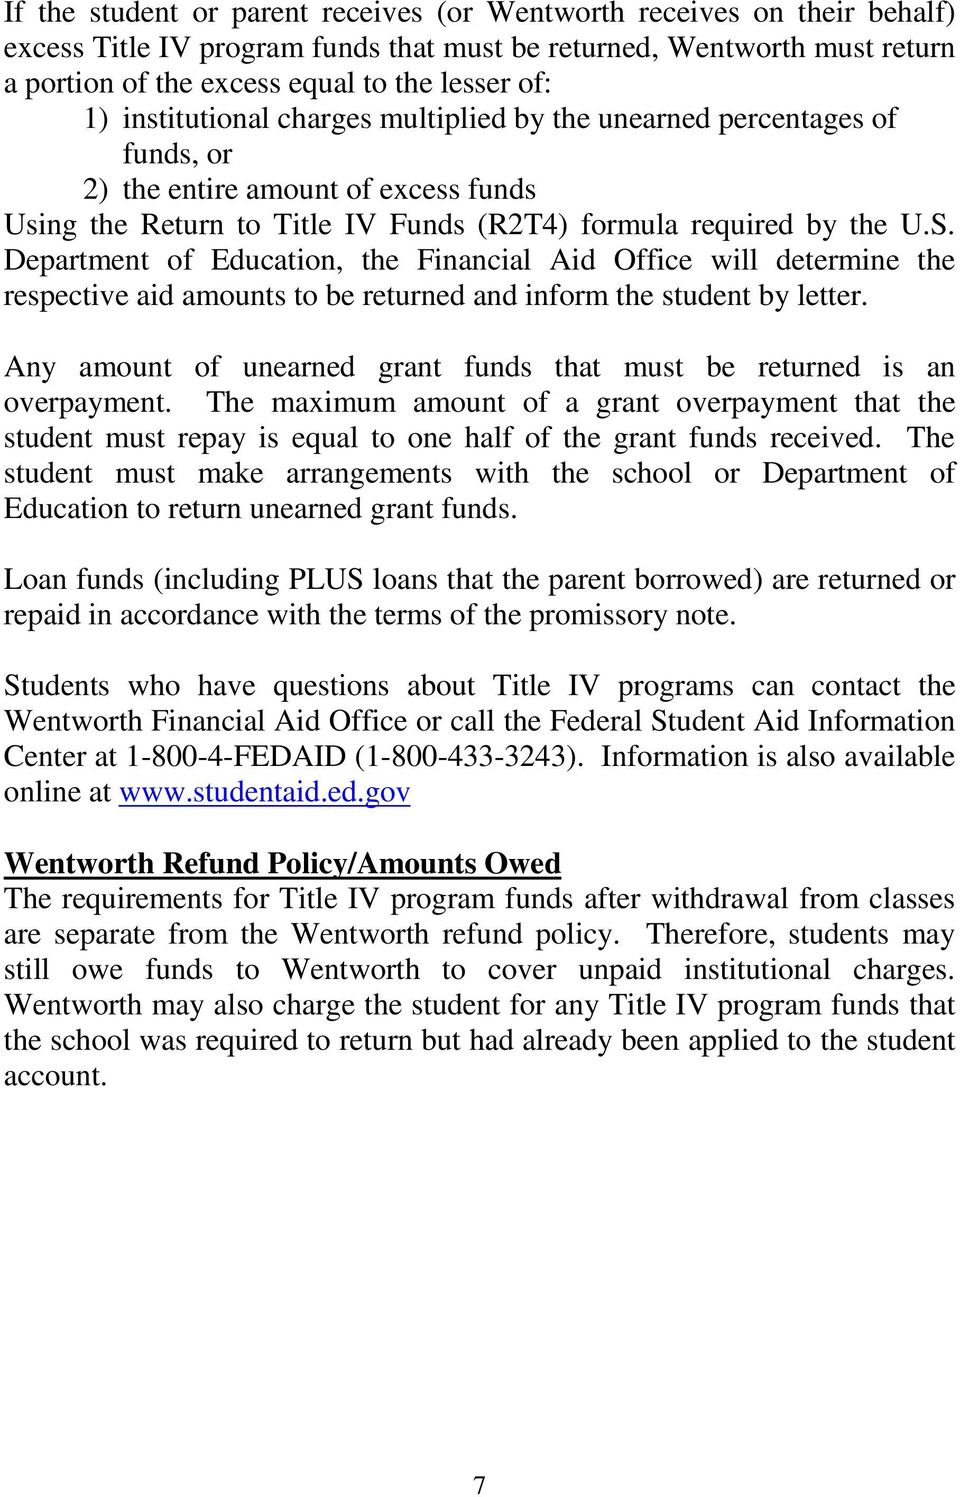 Department of Education, the Financial Aid Office will determine the respective aid amounts to be returned and inform the student by letter.